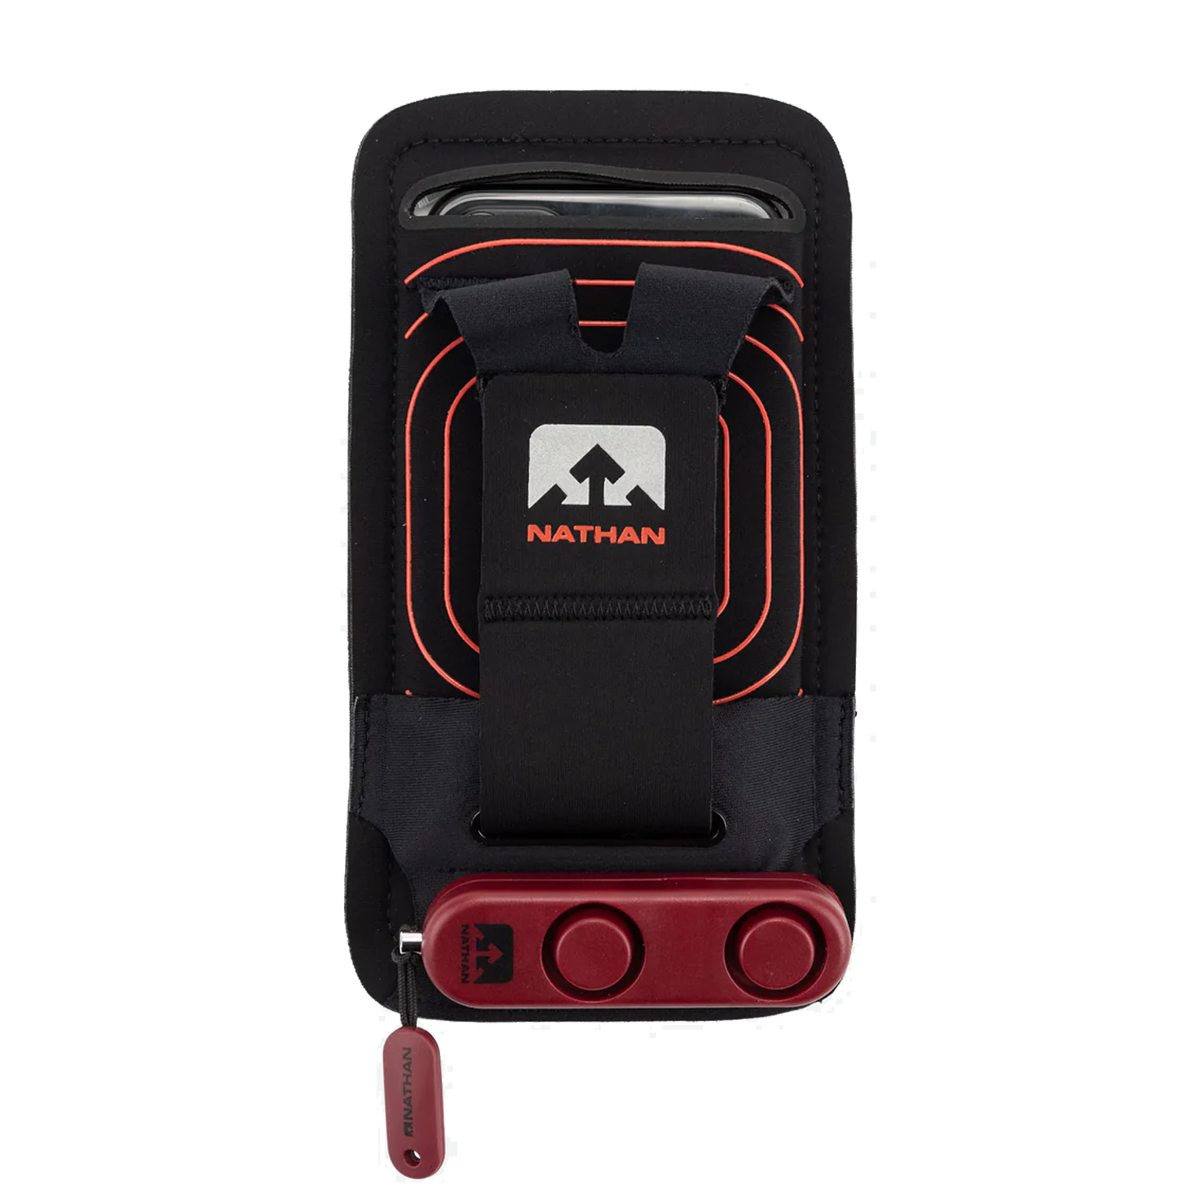 Nathan SaferRun Ripcord Siren Handheld Phone Carrier, , large image number null